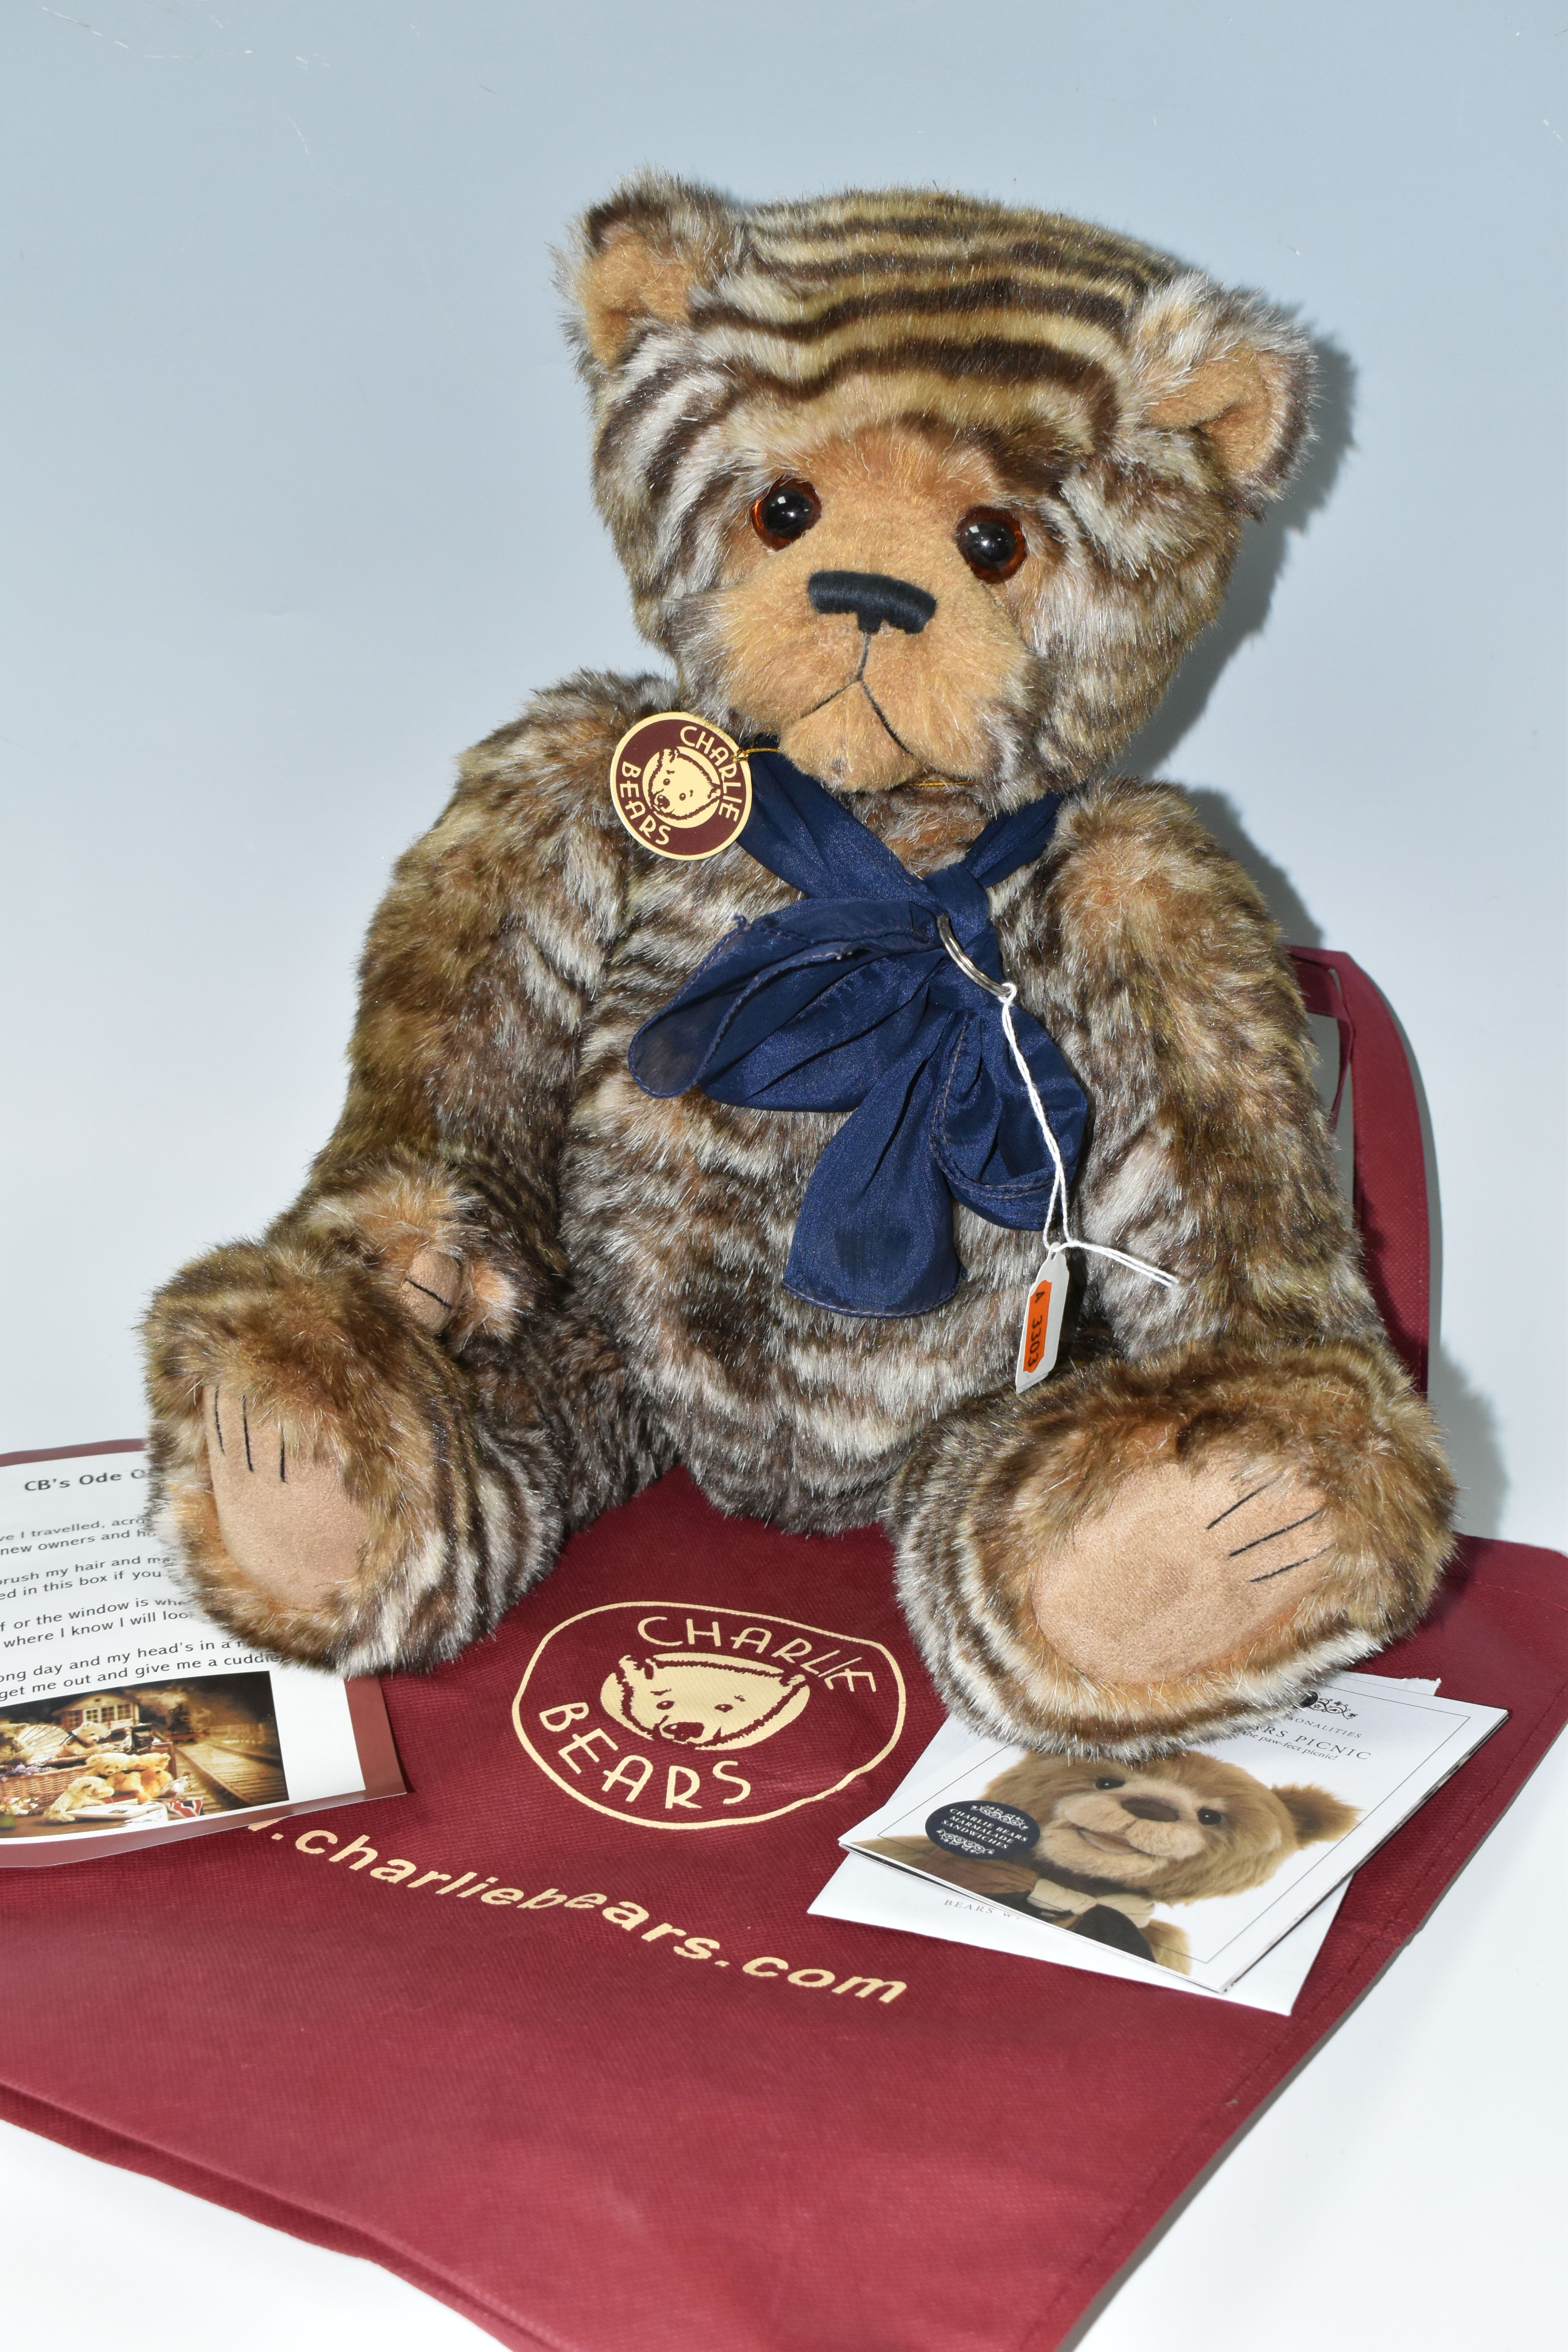 A CHARLIE BEARS 'OTTO' TEDDY BEAR, no CB131299, designed by Heather Lyell, height approximately